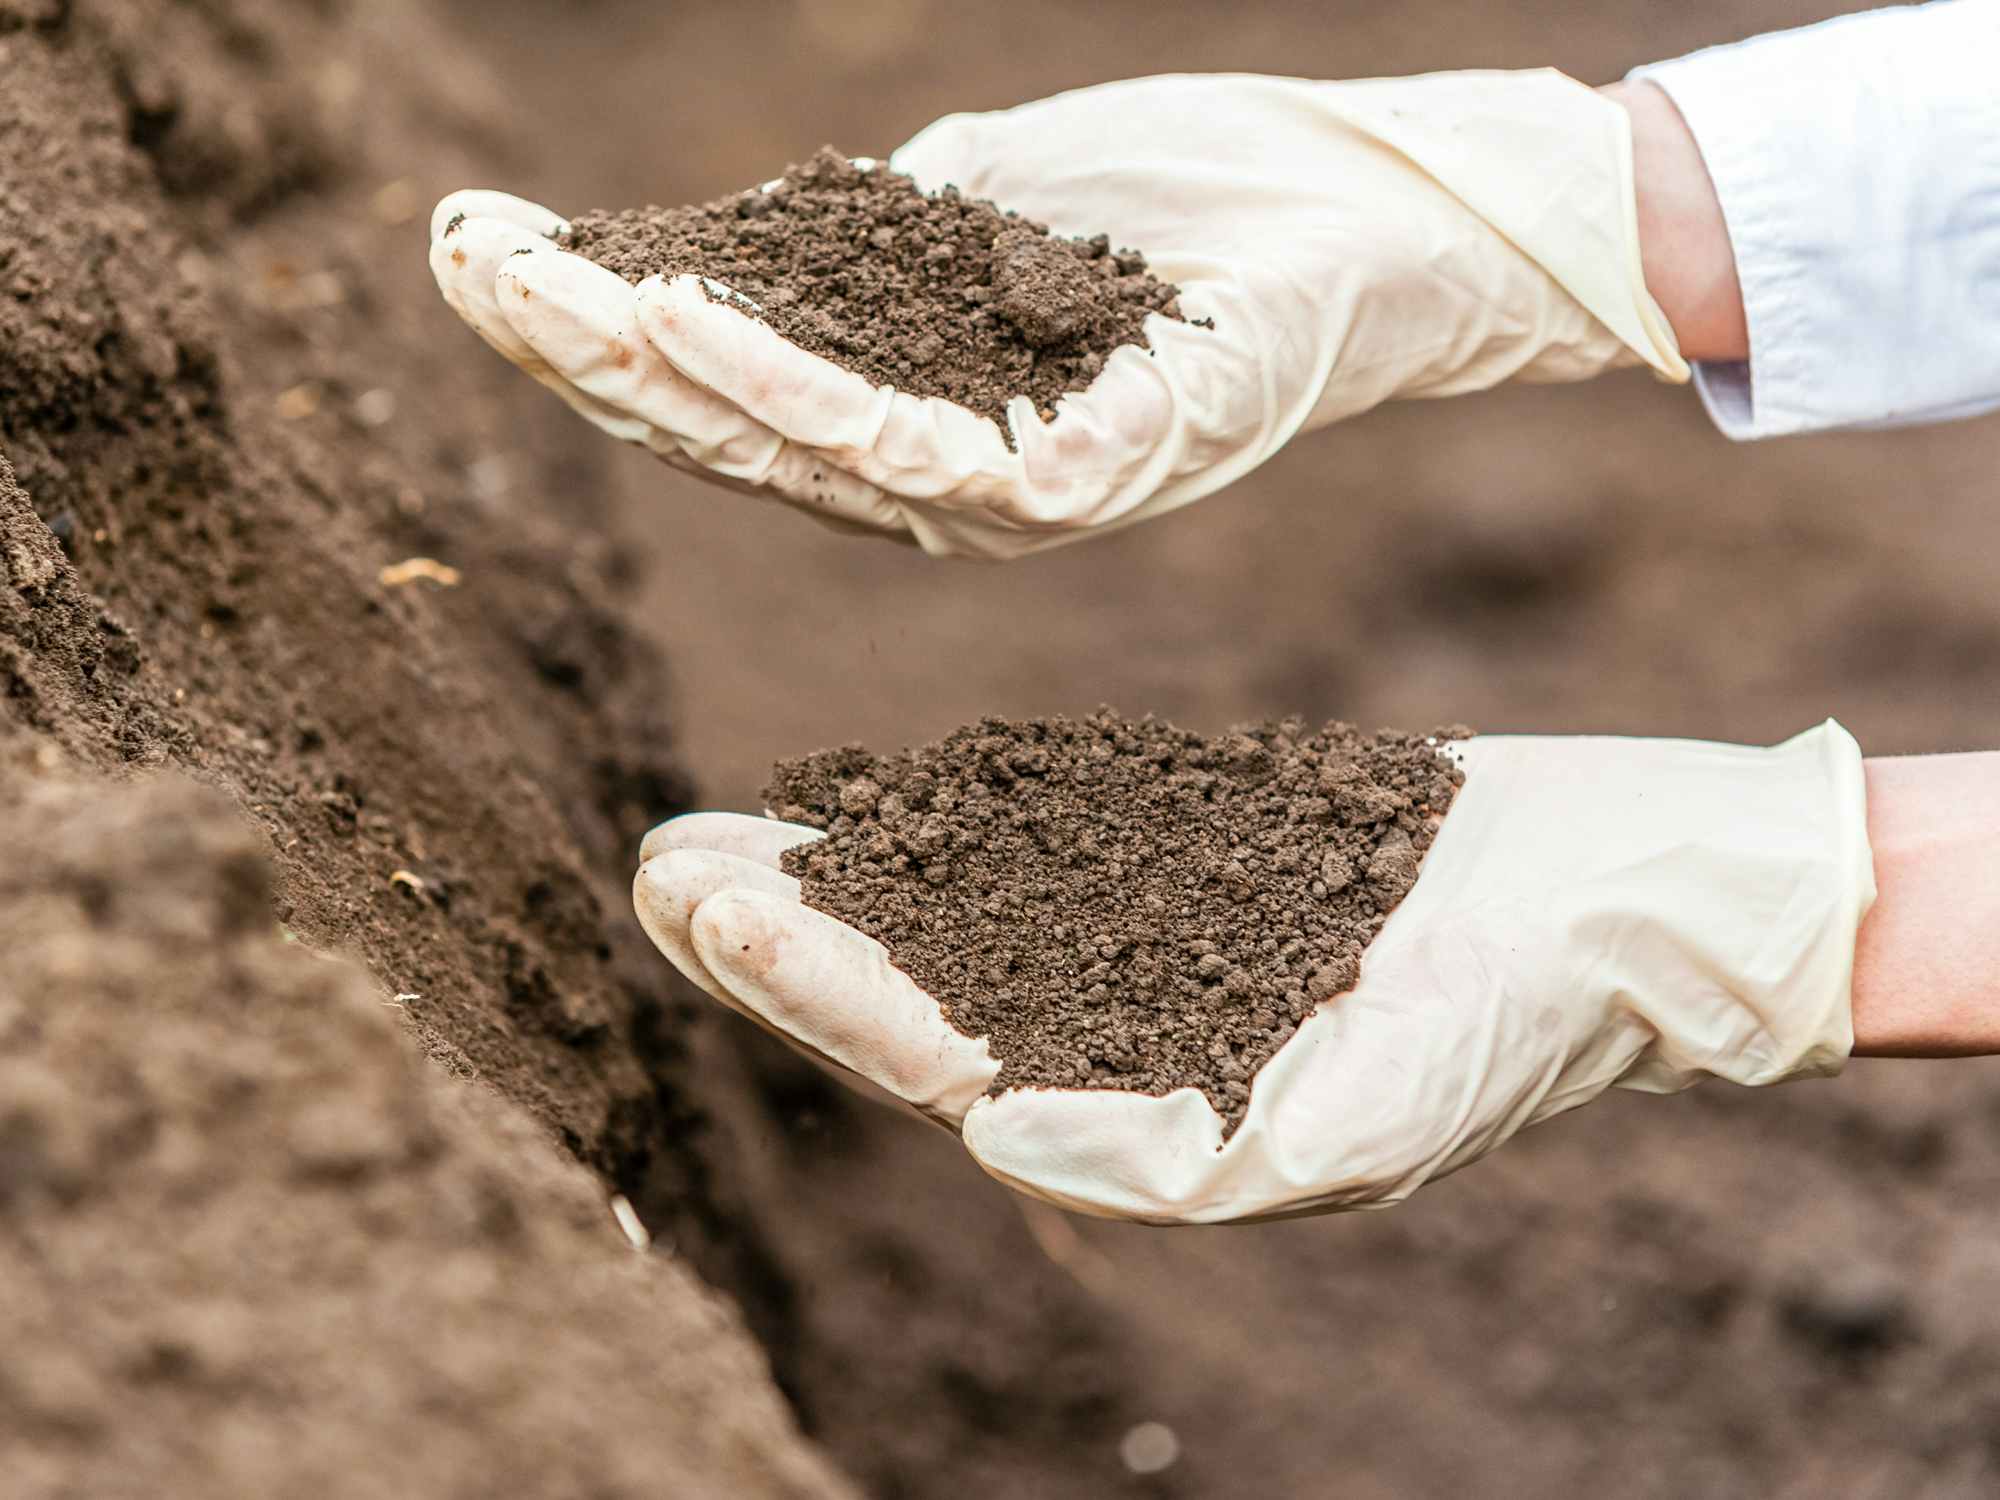 person looking at dirt in their hands